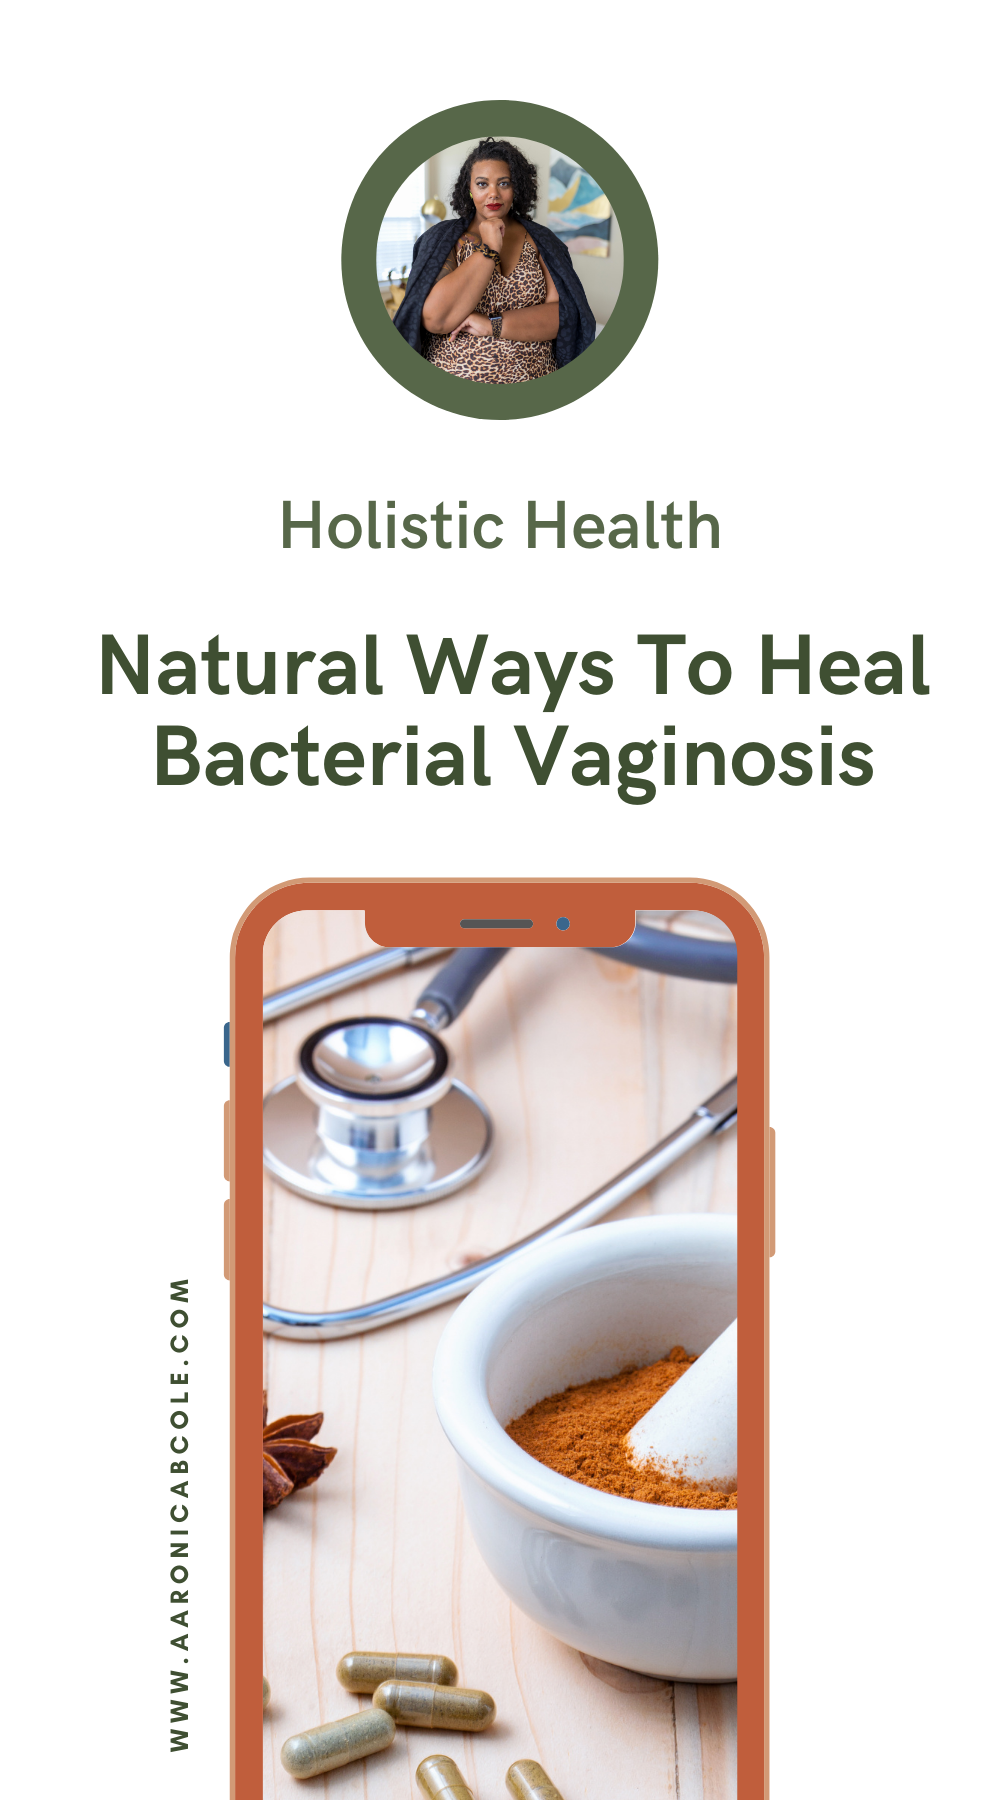 After battling with what seemed like a never-ending bought of bacterial vaginosis, I finally got rid of it using natural remedies.